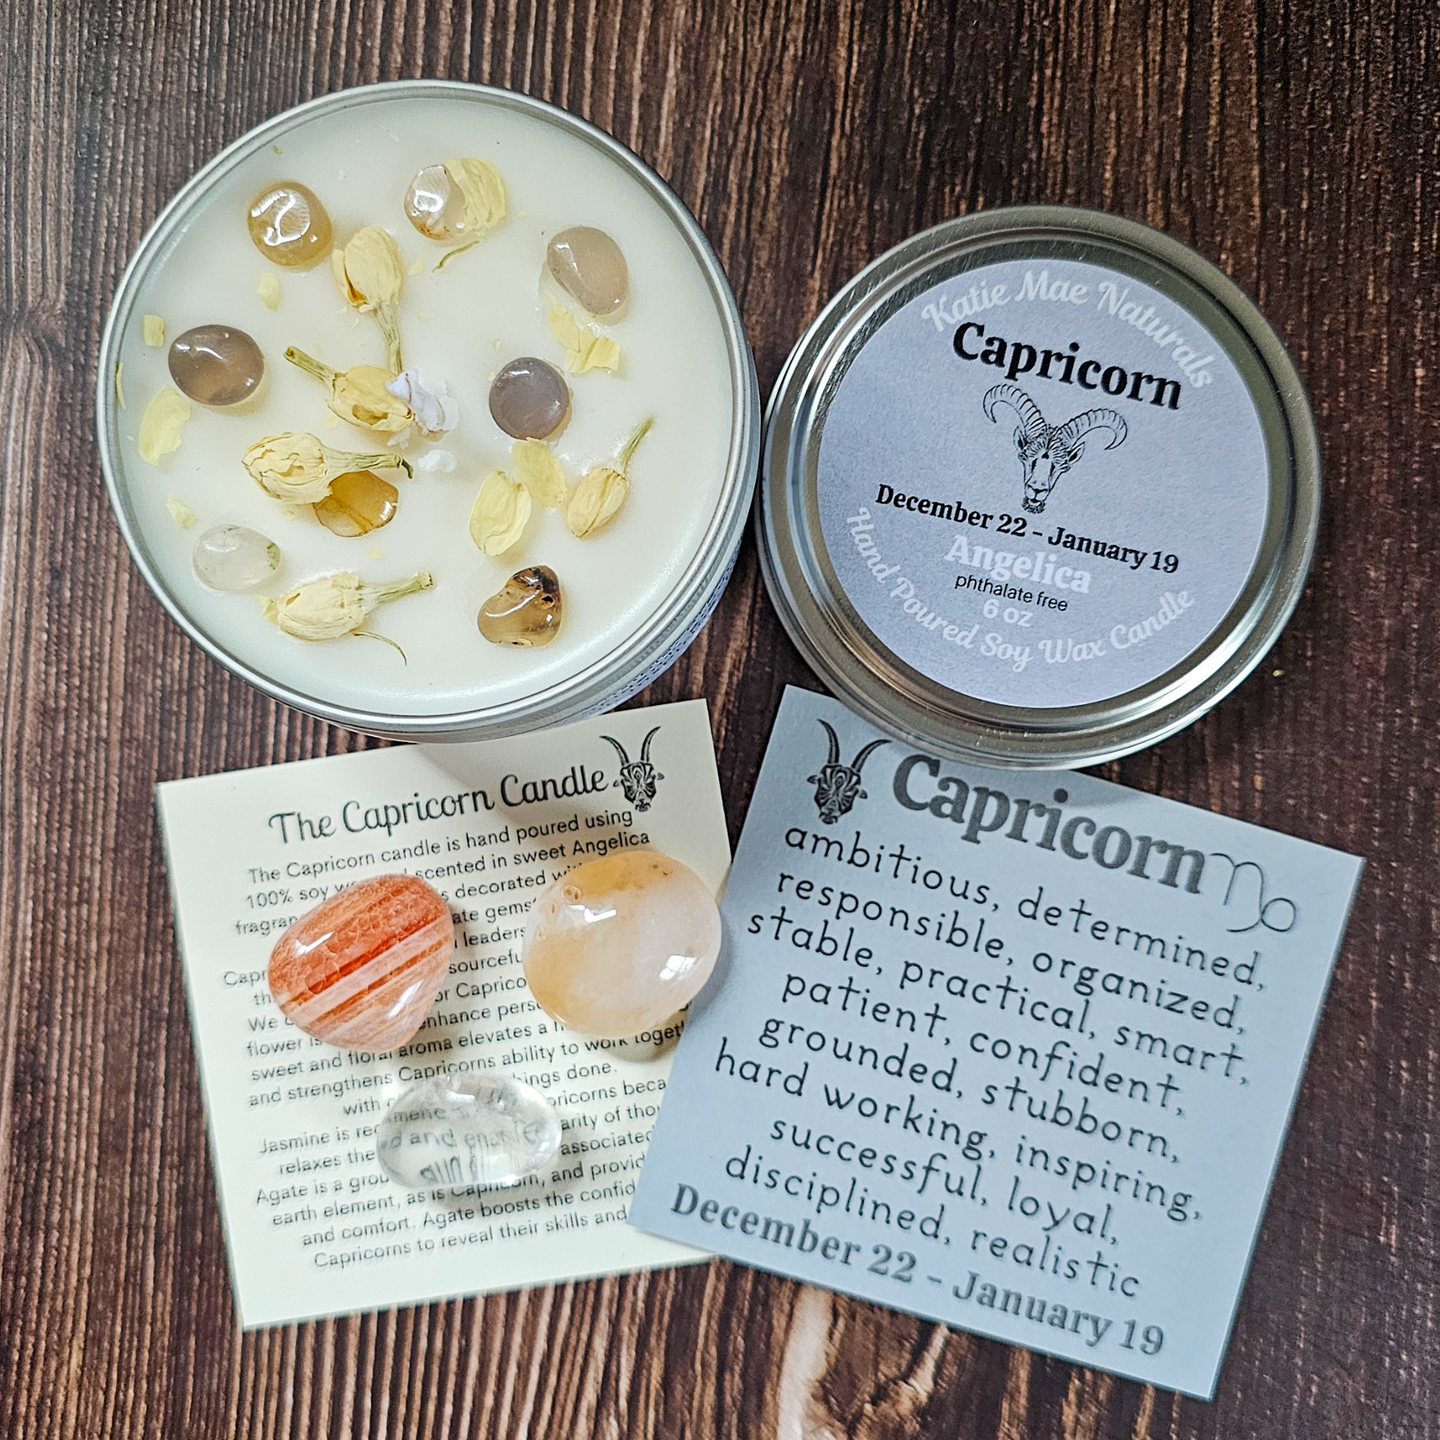 Capricorn candle and crystal gift set